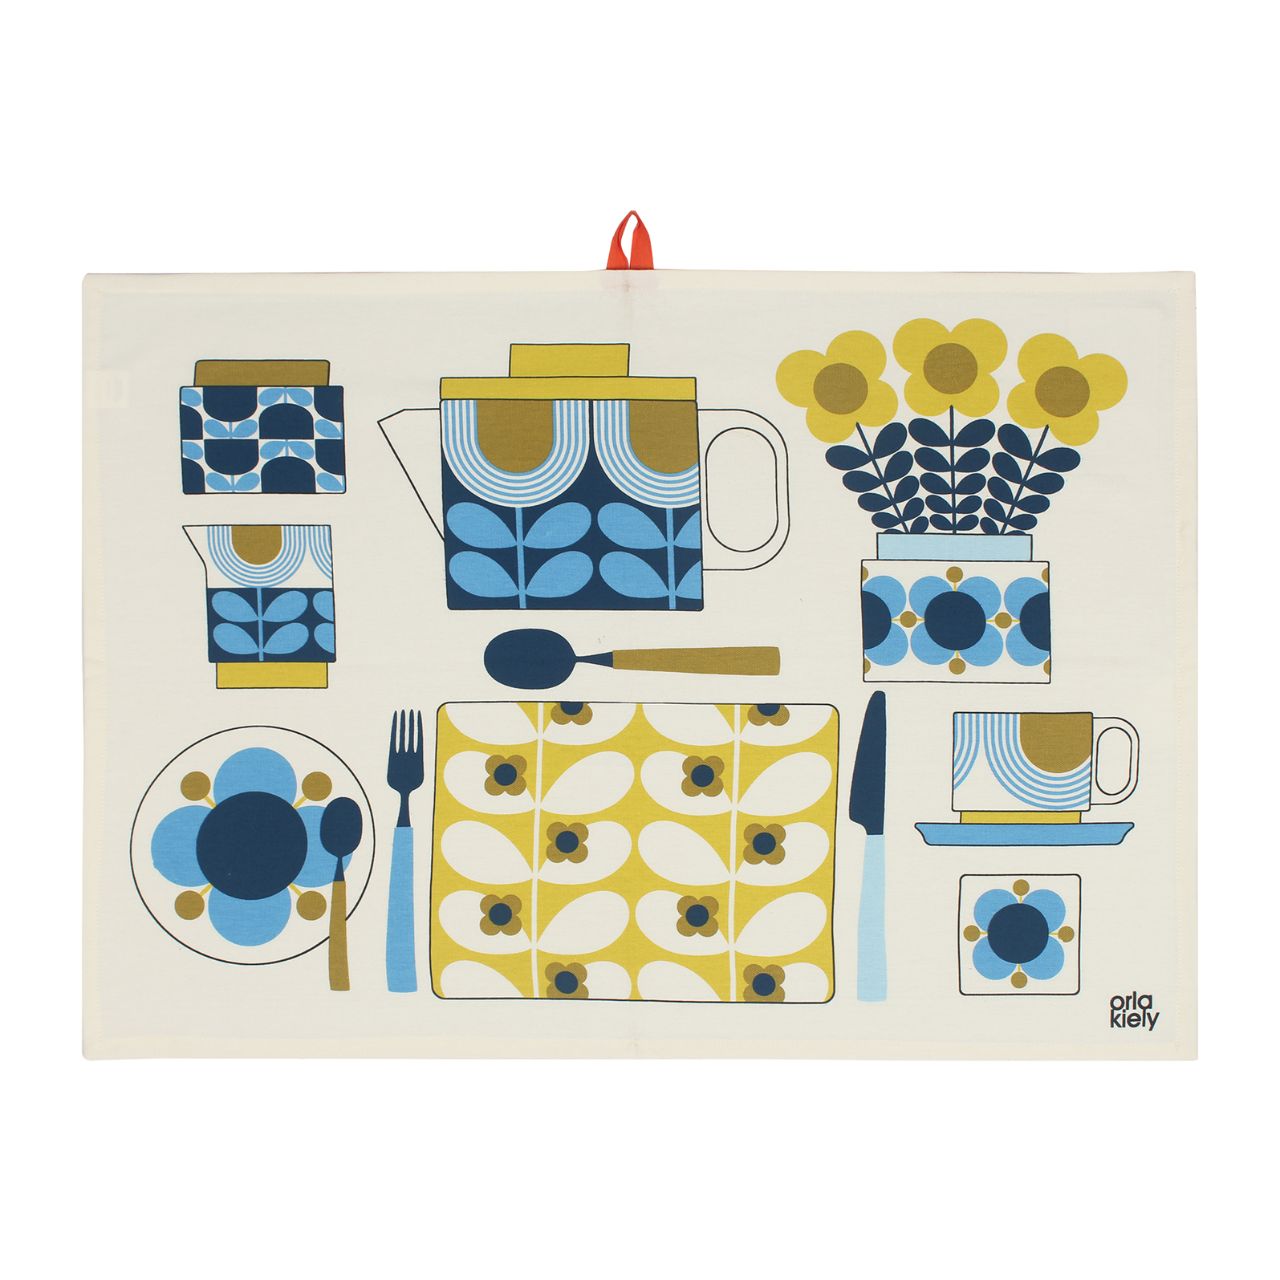 Tipperary Orla Kiely Set of 2 T-Towels - Afternoon Tea  Add a touch of modern style to your kitchen with this set of two Tea Towels.  The set comes with a Tea Towel that features the Atomic Flower design and a second Tea Towel featuring the Orla Kiely table setting. Each Tea Towel features a useful hanging loop to create an eye catching kitchen accessory even when not in use.